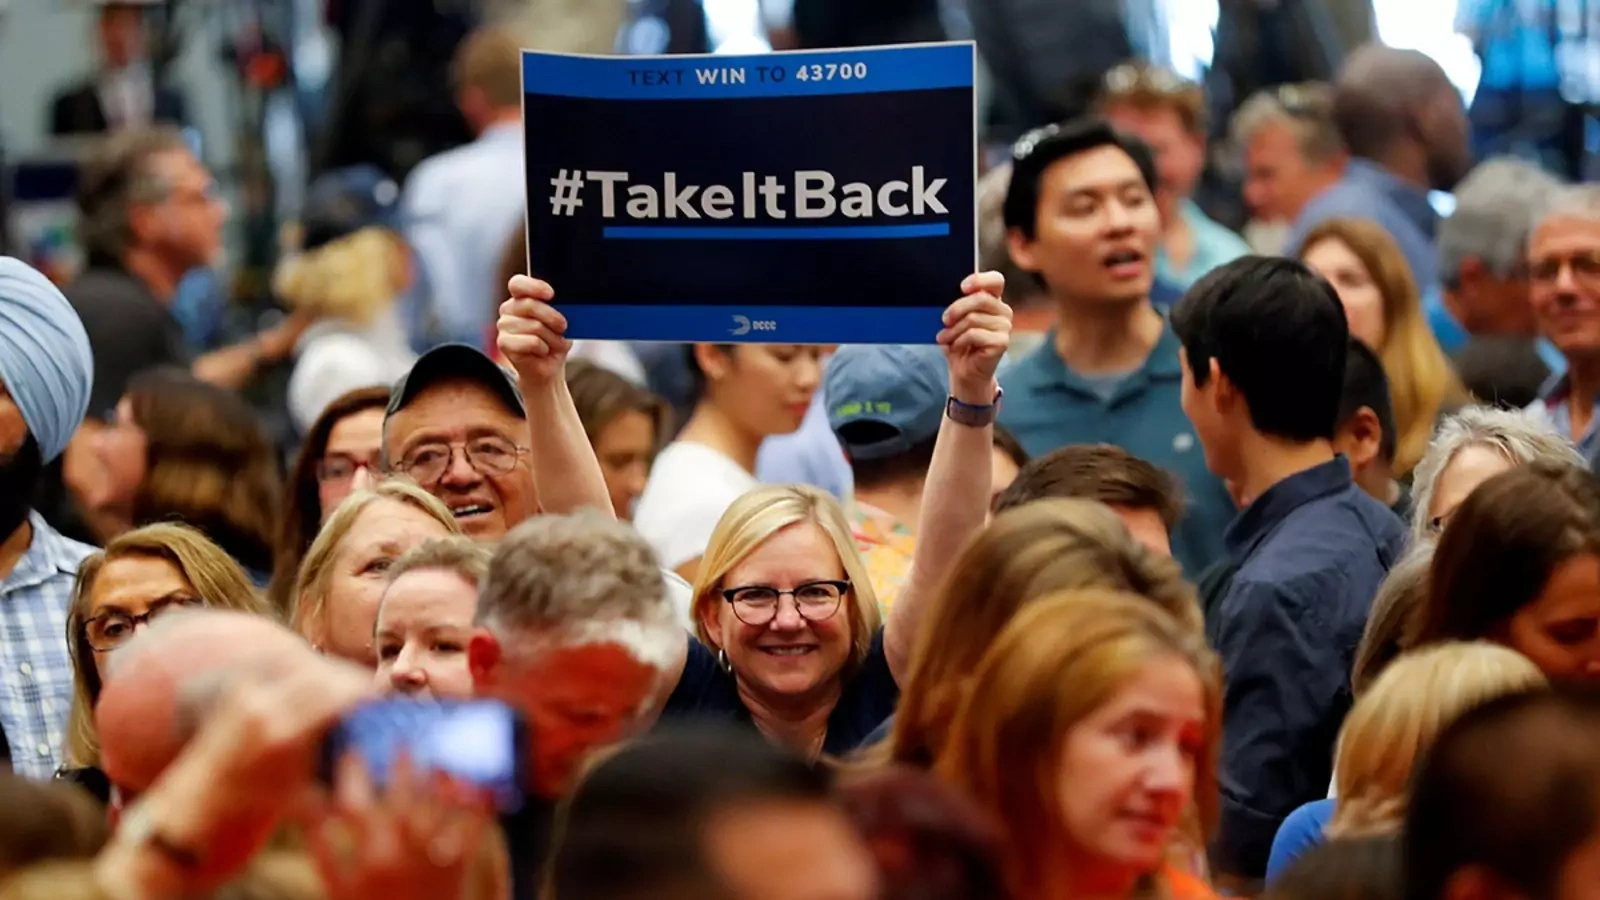  A woman holds up a "Take It Back" sign at a political rally with former President Barack Obama in Anaheim, California.